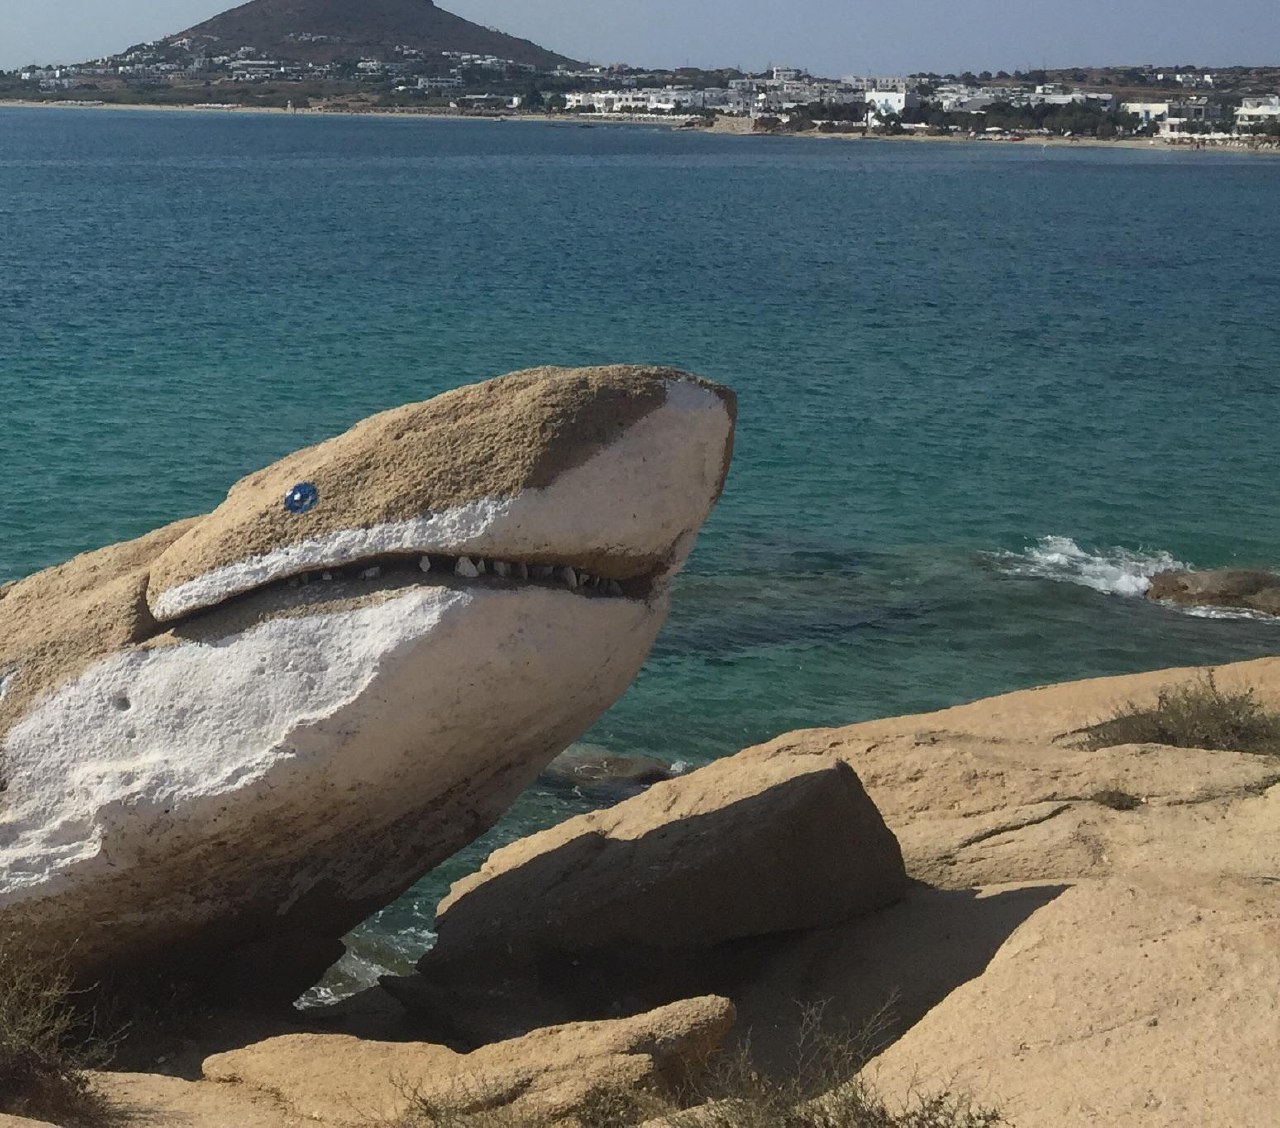 funny drawing on some rocks to make it look like a goofy looking shark coming out of the sea